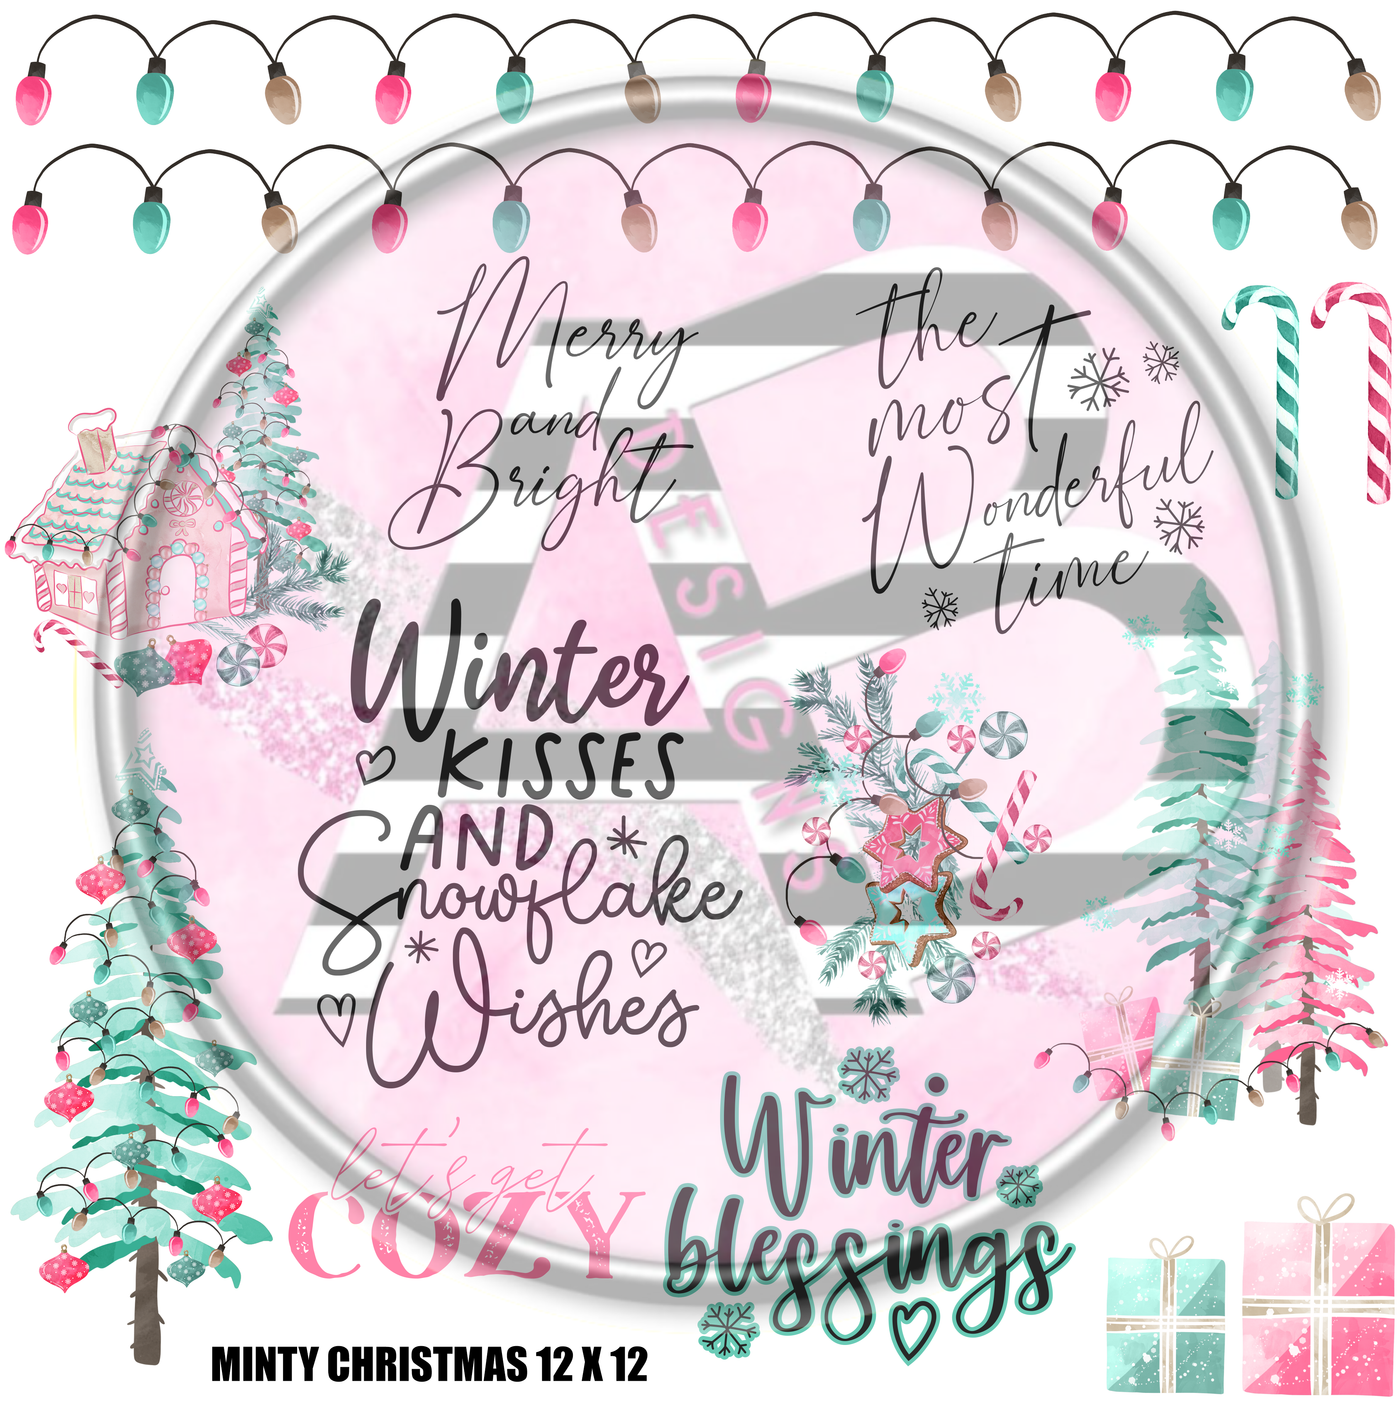 Minty Christmas 12 x 12 - Clear Cast Full Sheet